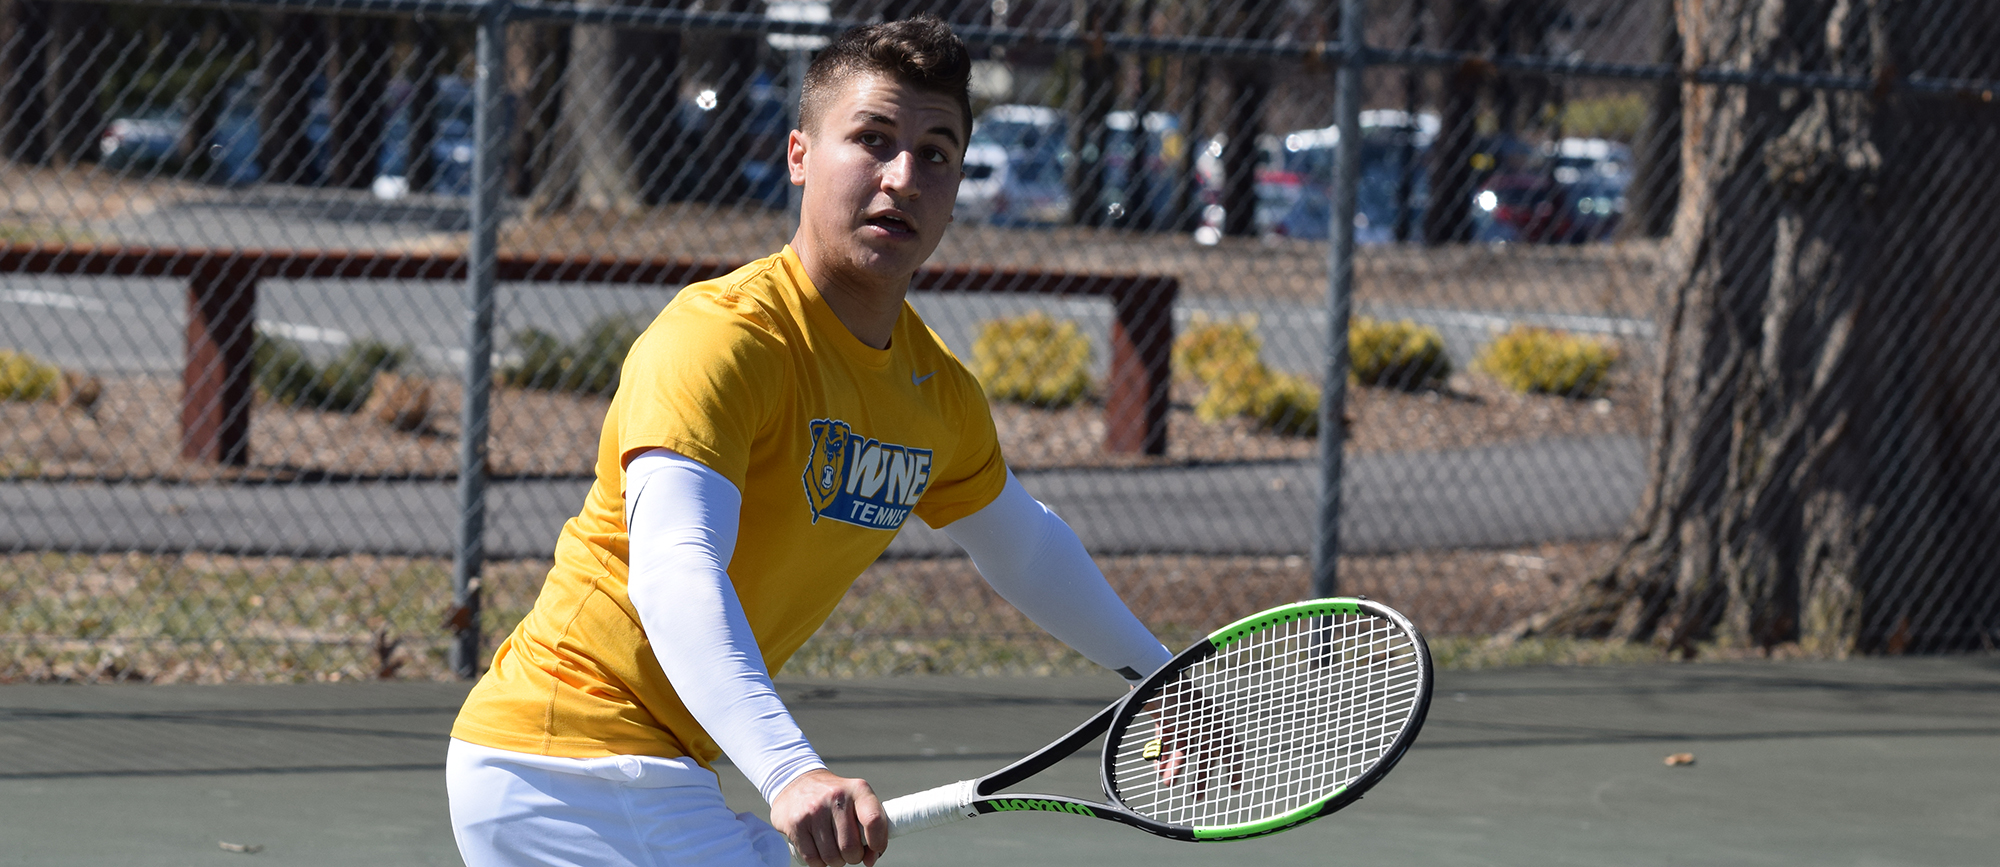 Sophomore David Kalmer improved to 9-1 in singles play, but WNE fell to Nichols 8-1 on Wednesday. (Photo by Rachael Margossian)